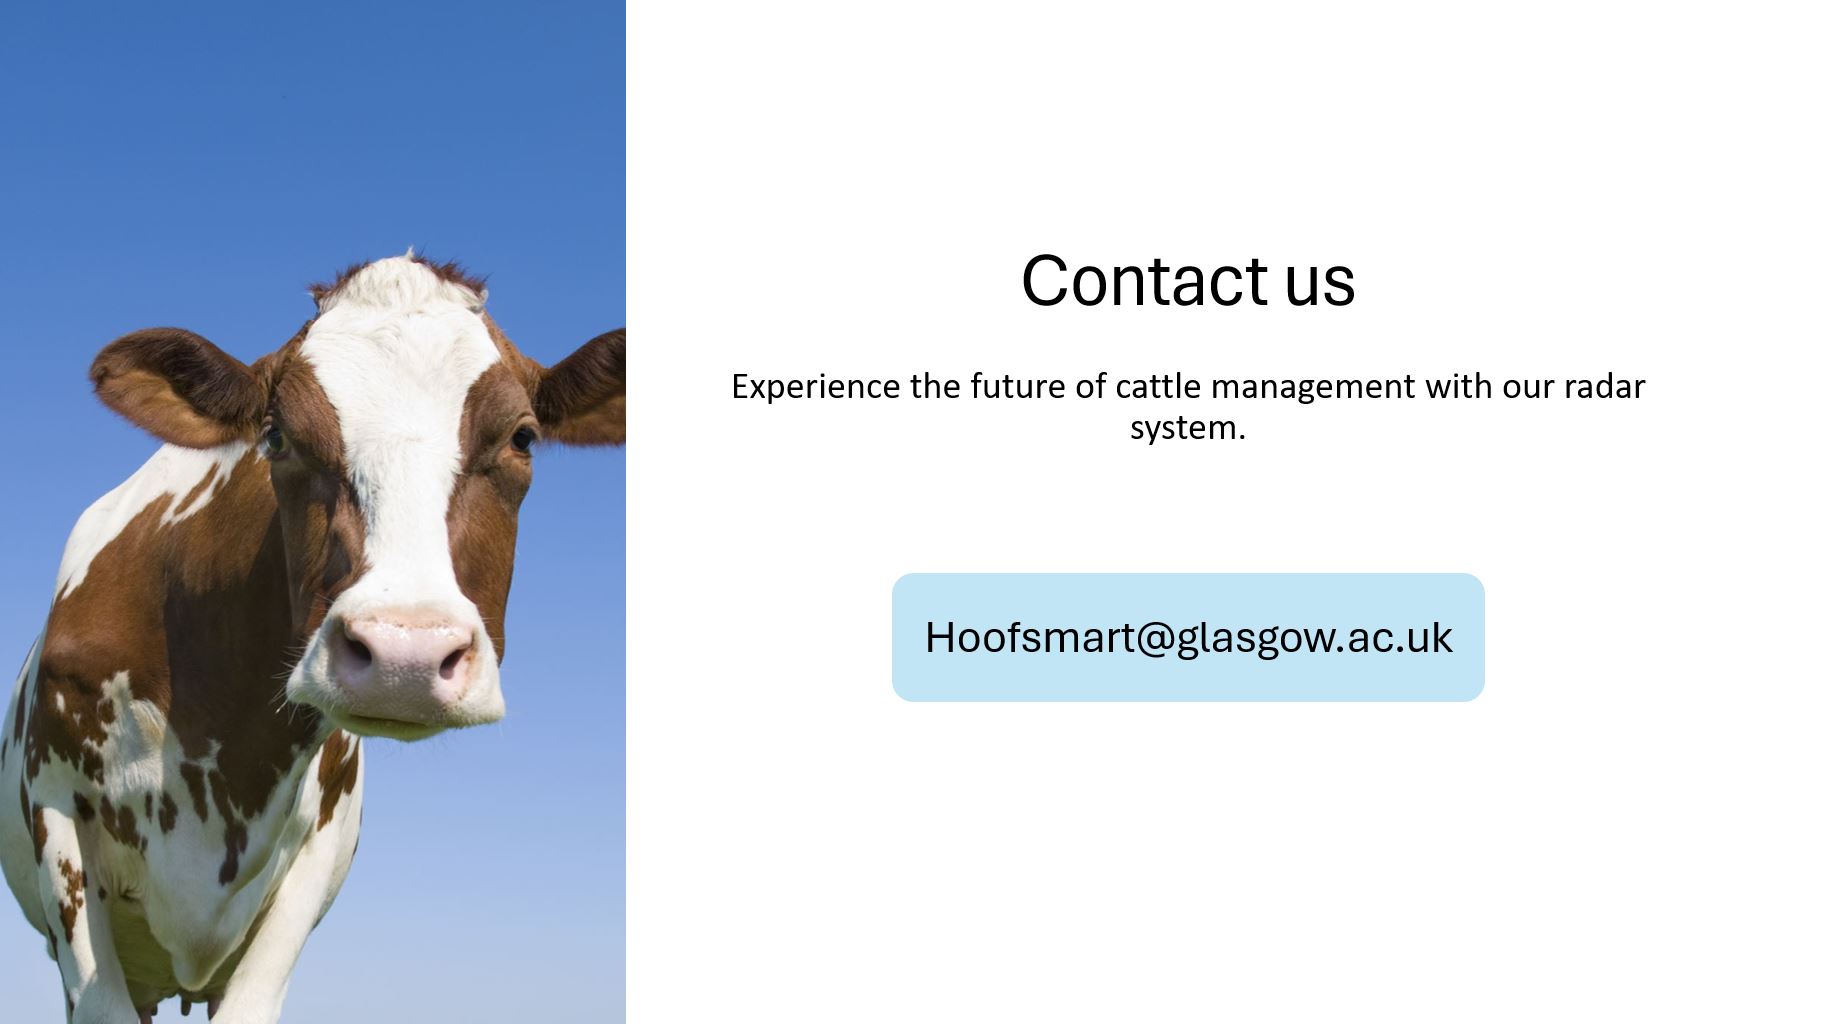 a brown and white cow looking at you - contact us - experience the future of cattle management with our radar system - hoofsmart@glasgow.ac.uk